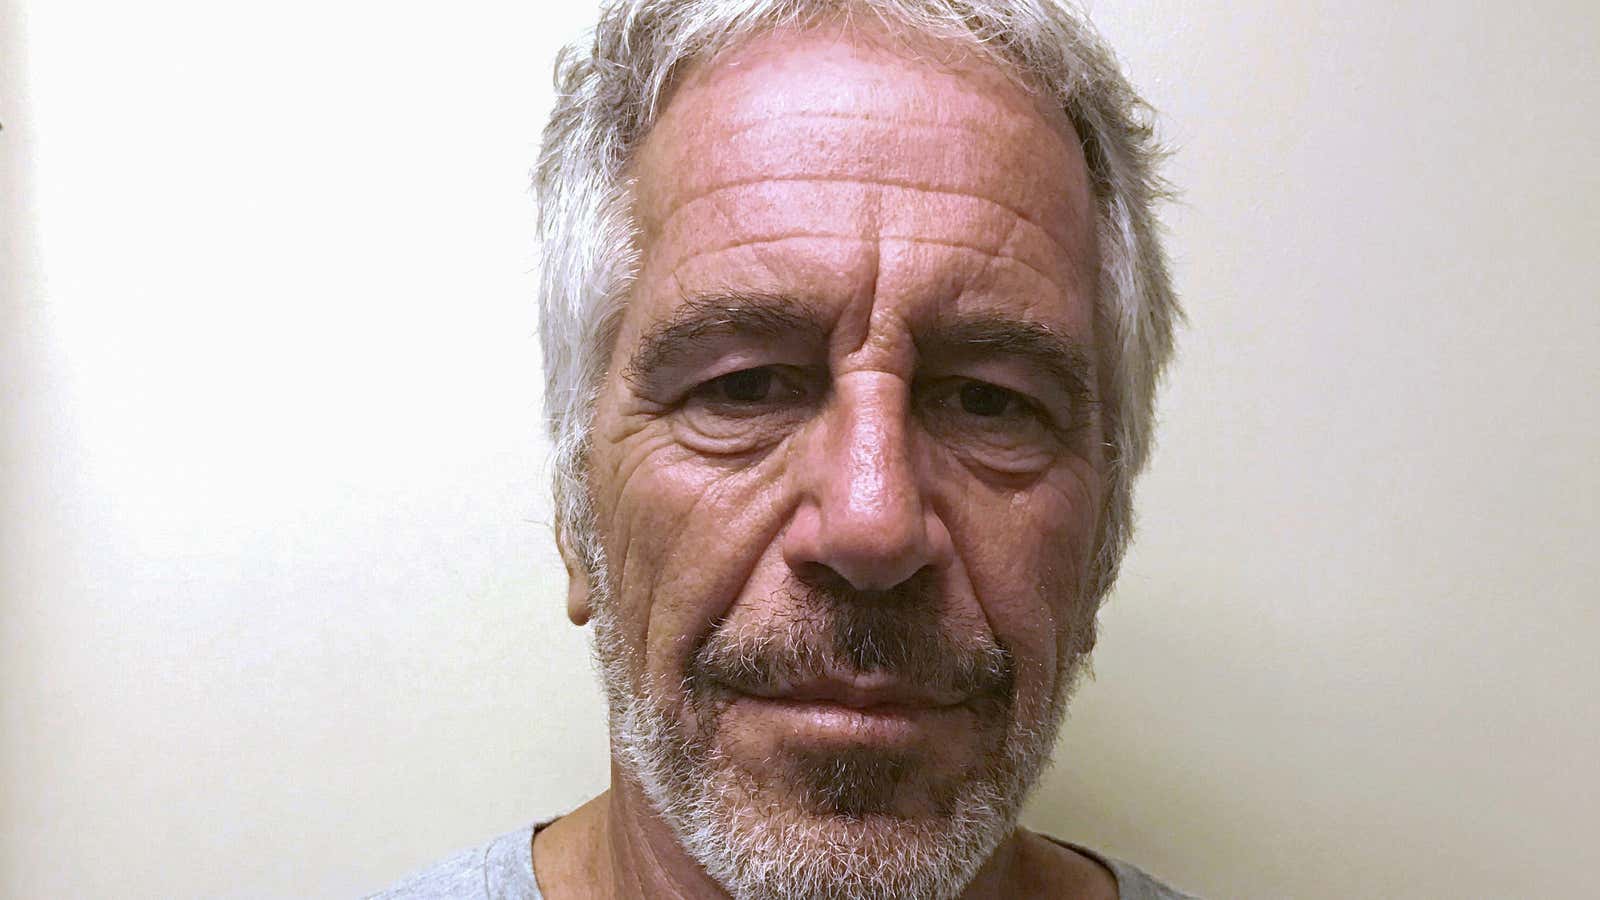 Jeffrey Epstein in a photograph taken for the New York State Division of Criminal Justice Services’ sex offender registry.